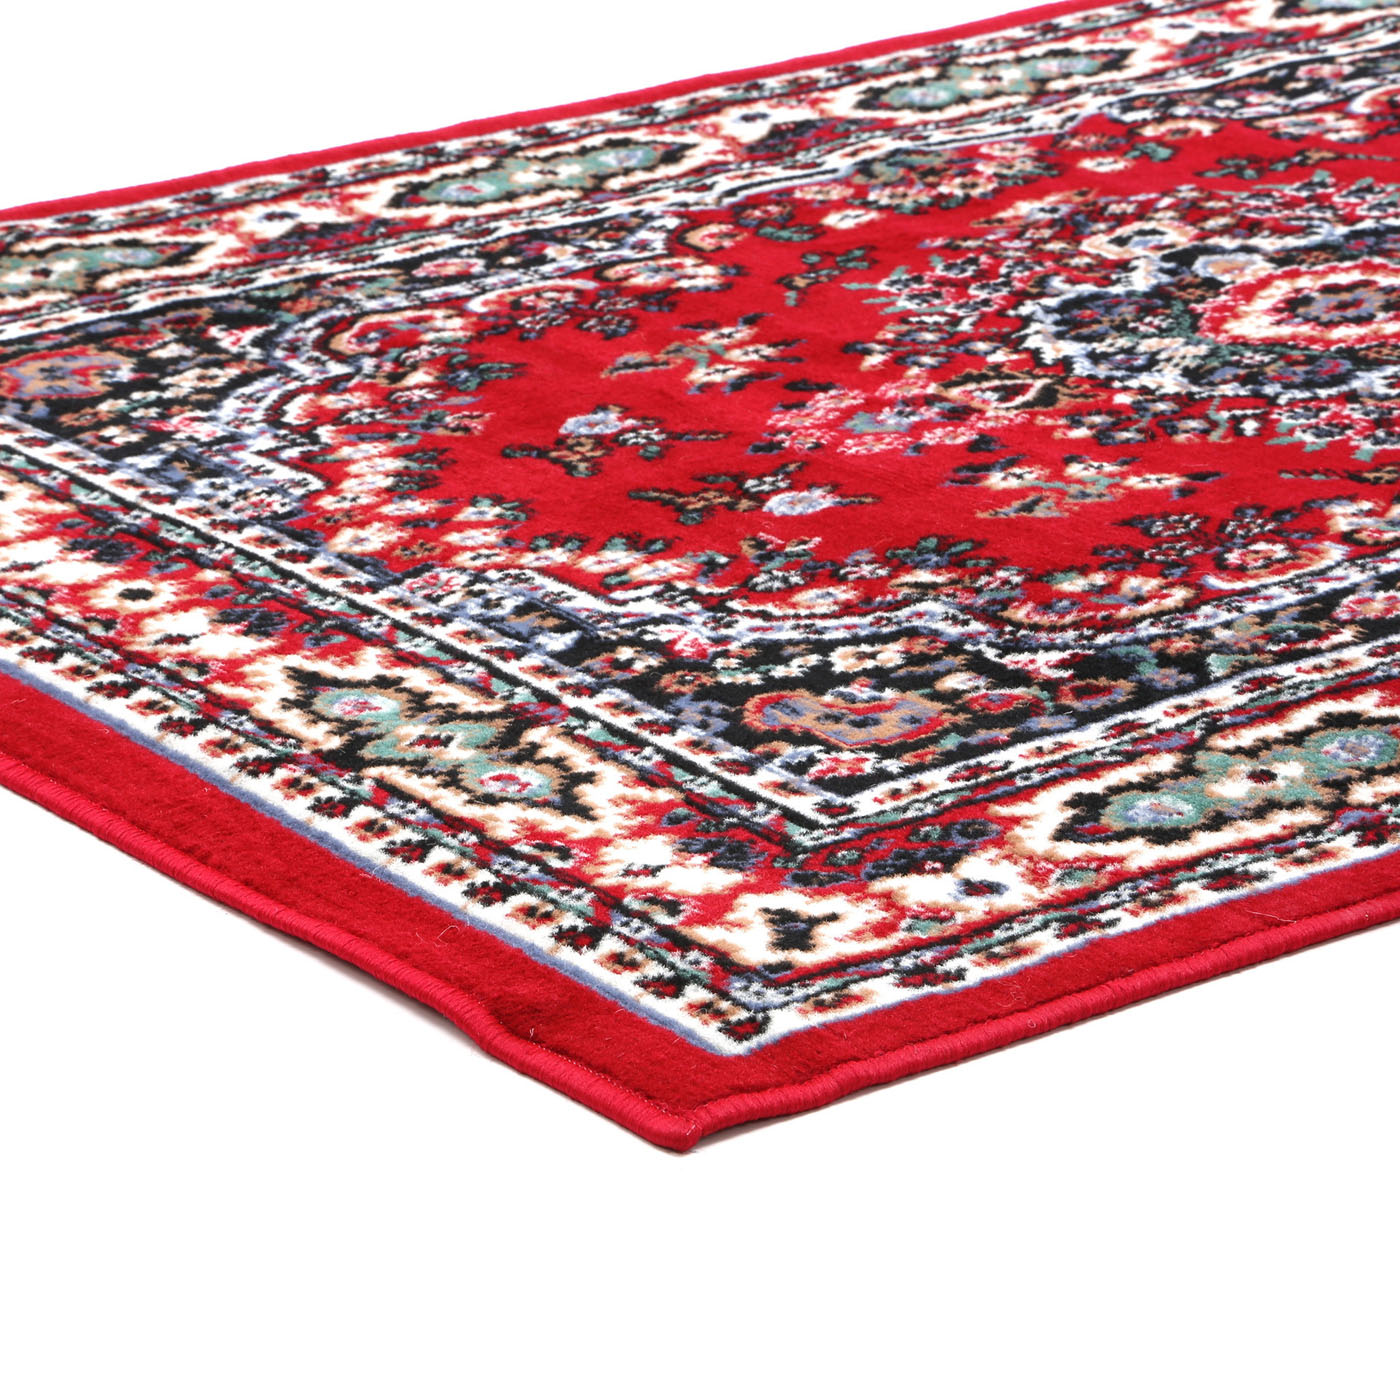 Area Rugs Traditional Area Rug Bordered Medallion Design Persian Oriental Rugs Carpet Runners